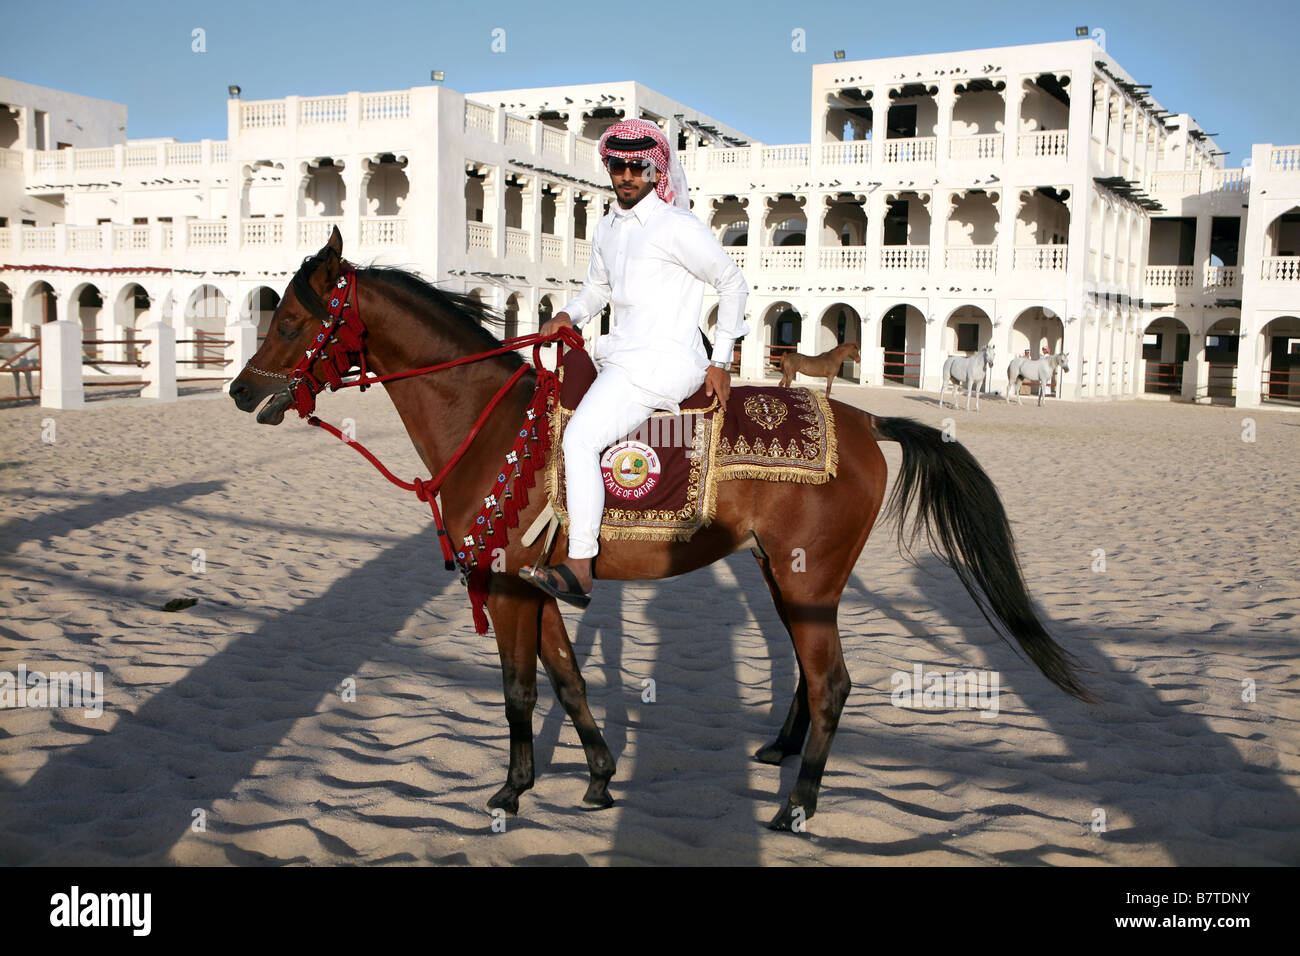 A rider shows off a pure bred Arab stallion its saddle adorned with the State of Qatar arms at a paddock in central Doha, Qatar Stock Photo